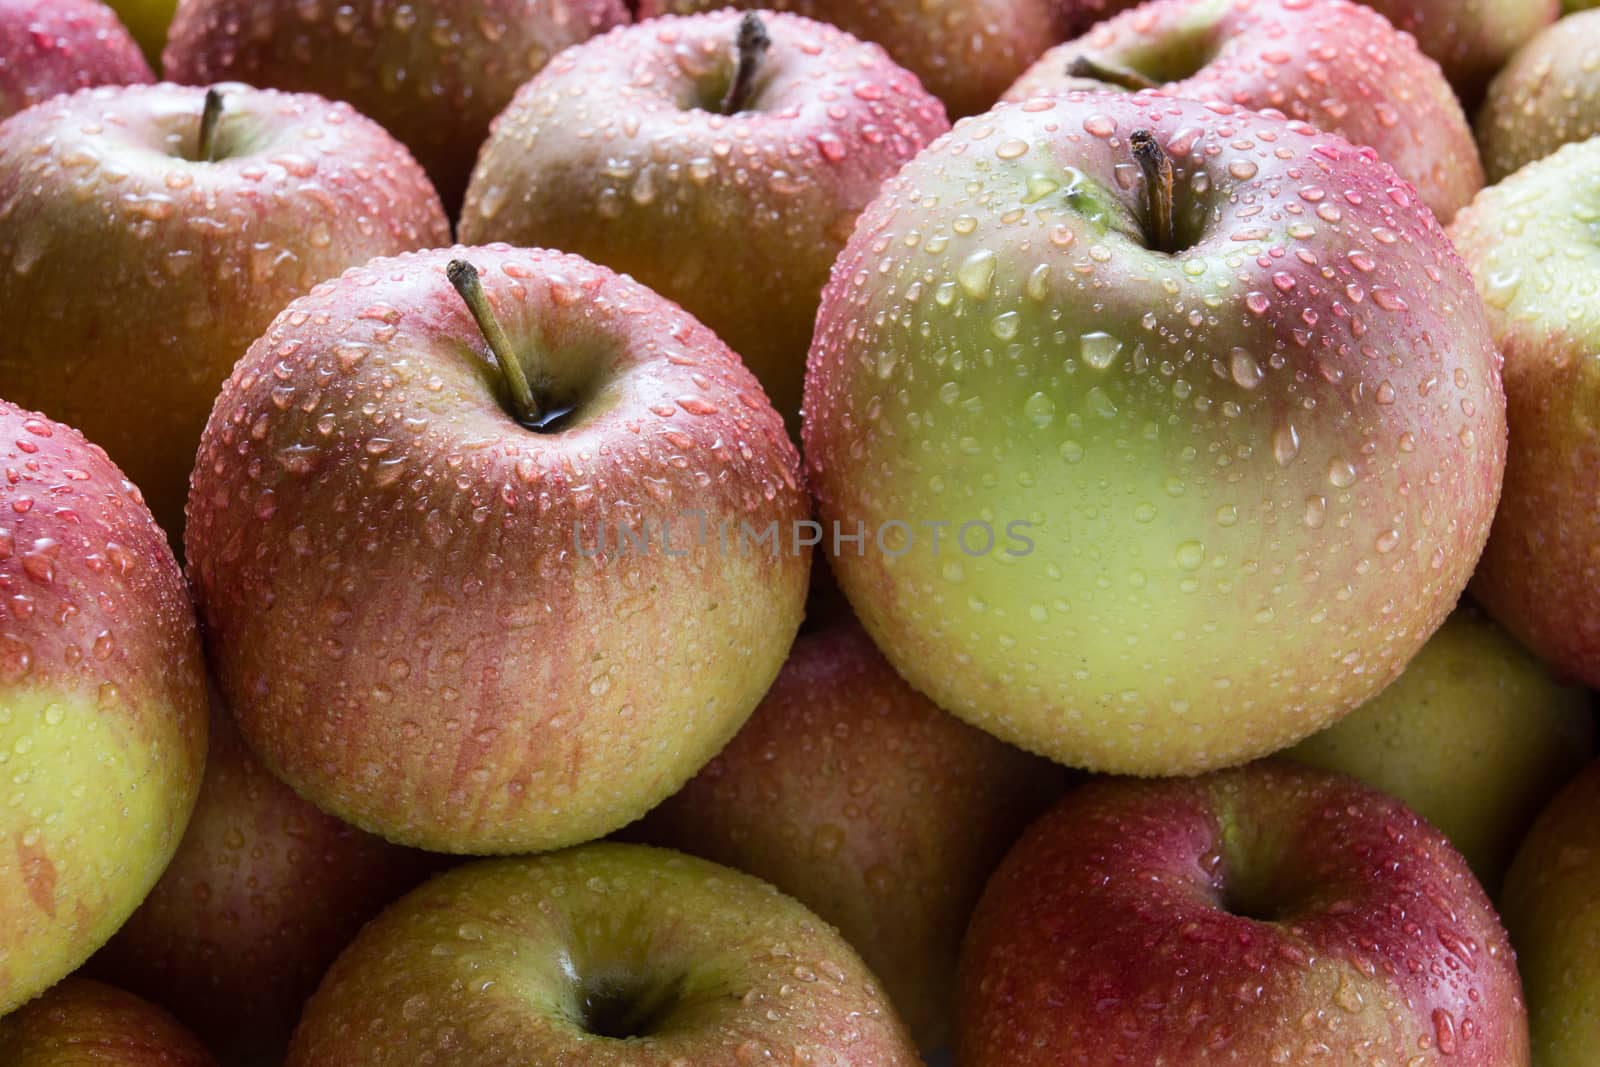 Apples with water drops background